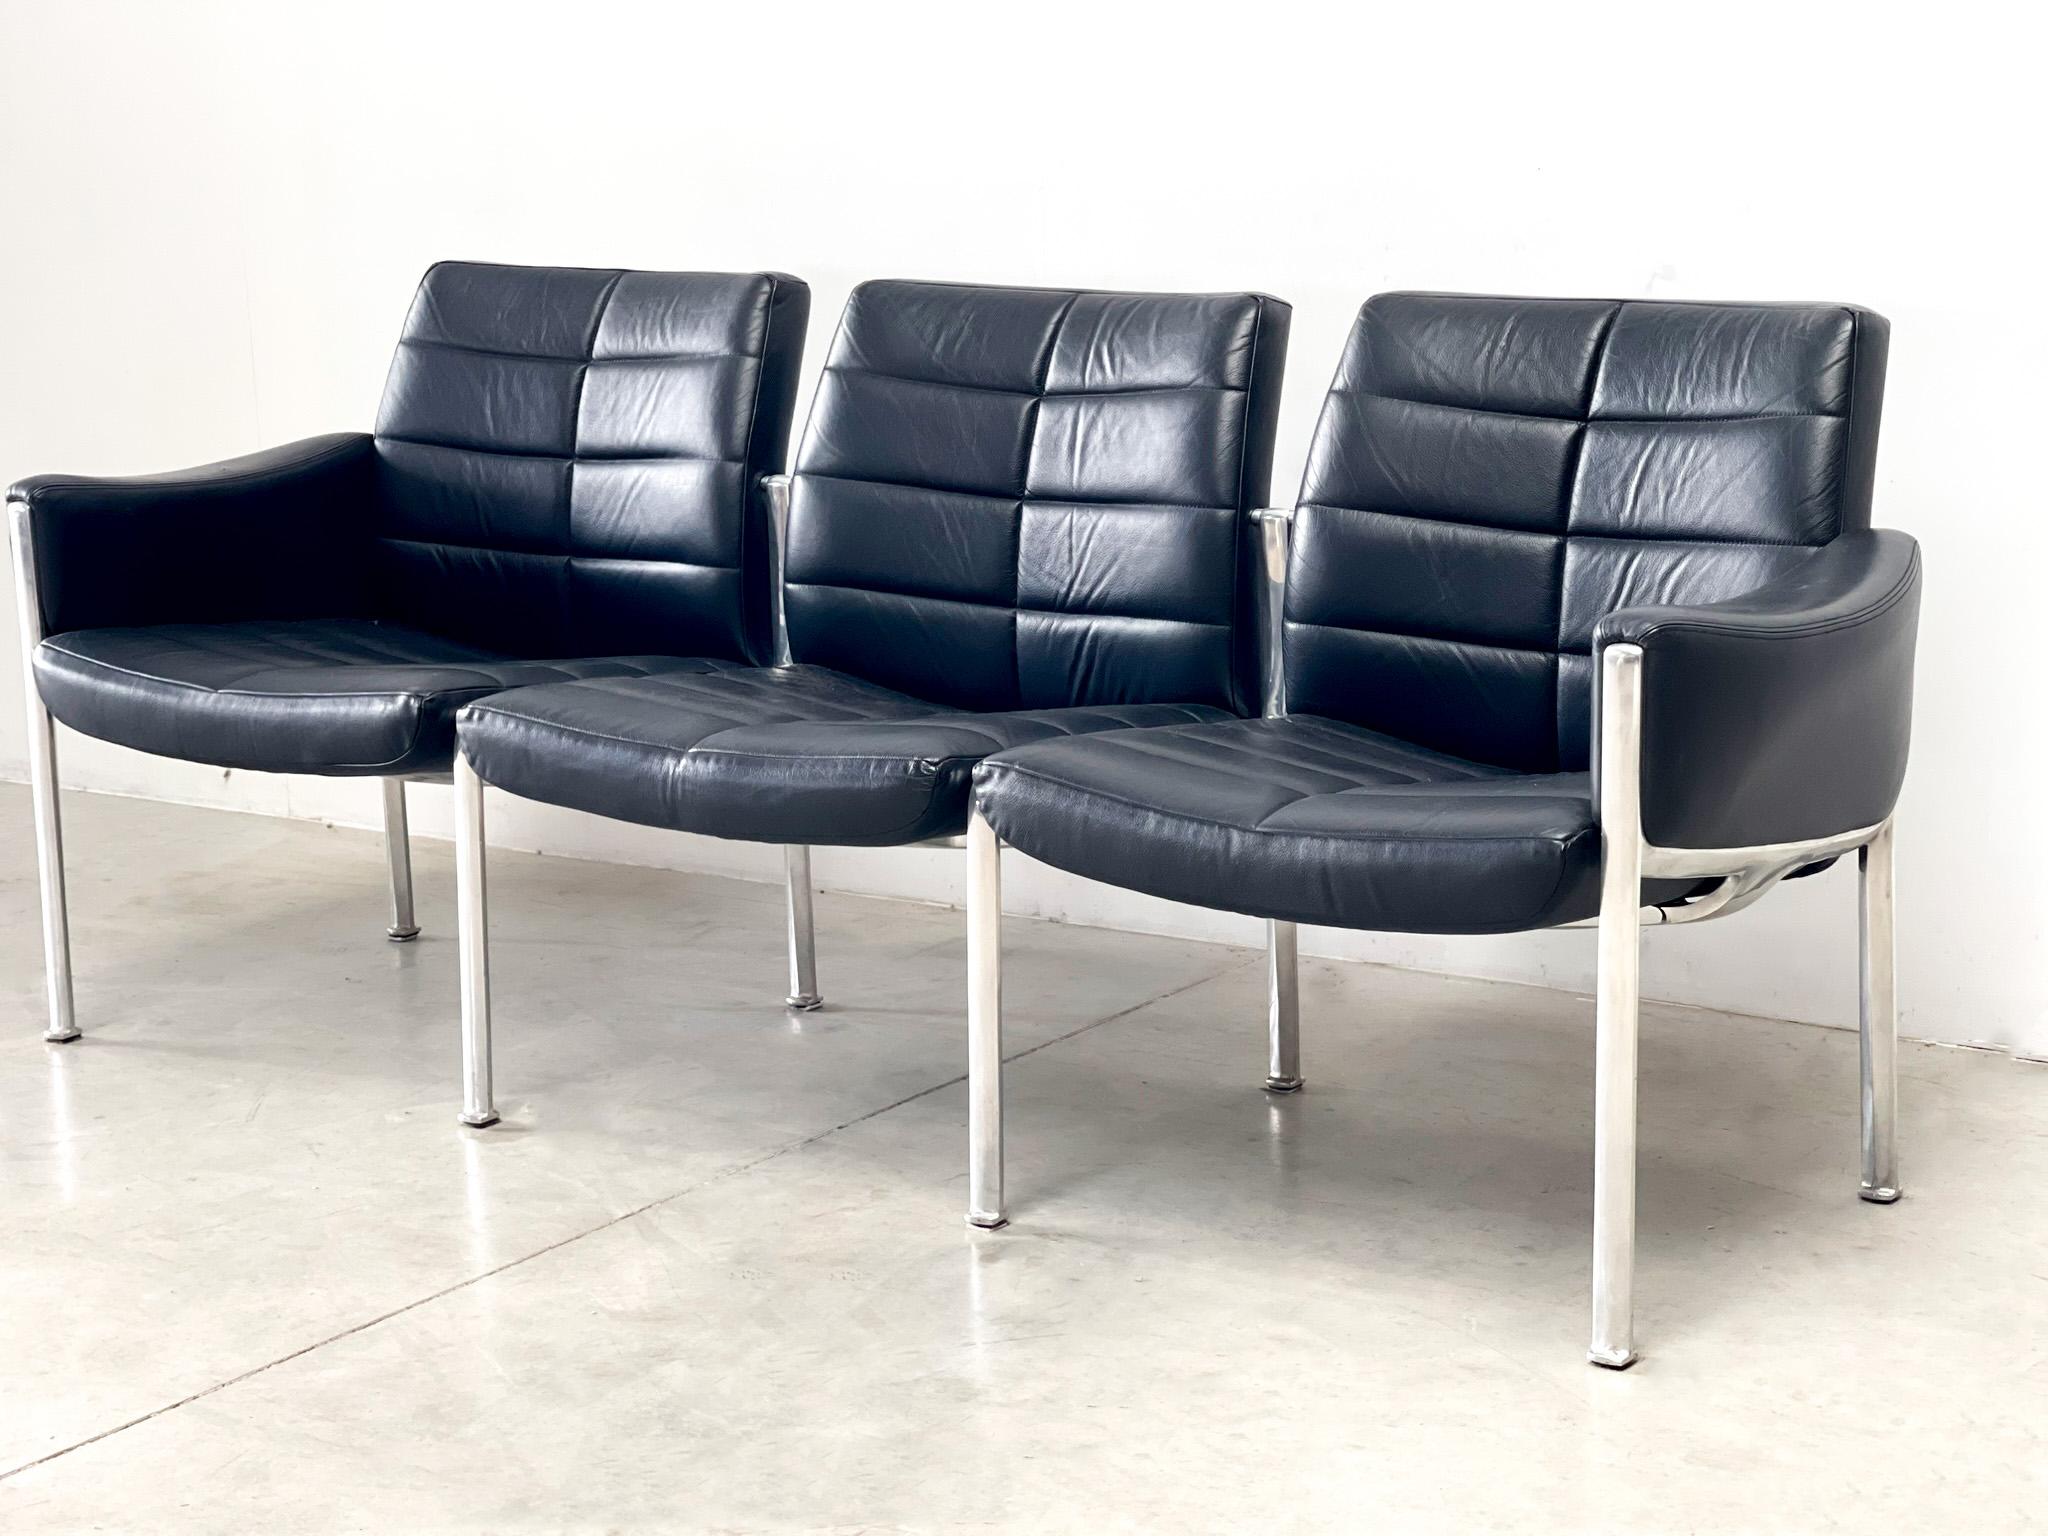 Leather Miller Borgsen leather and steel sofa